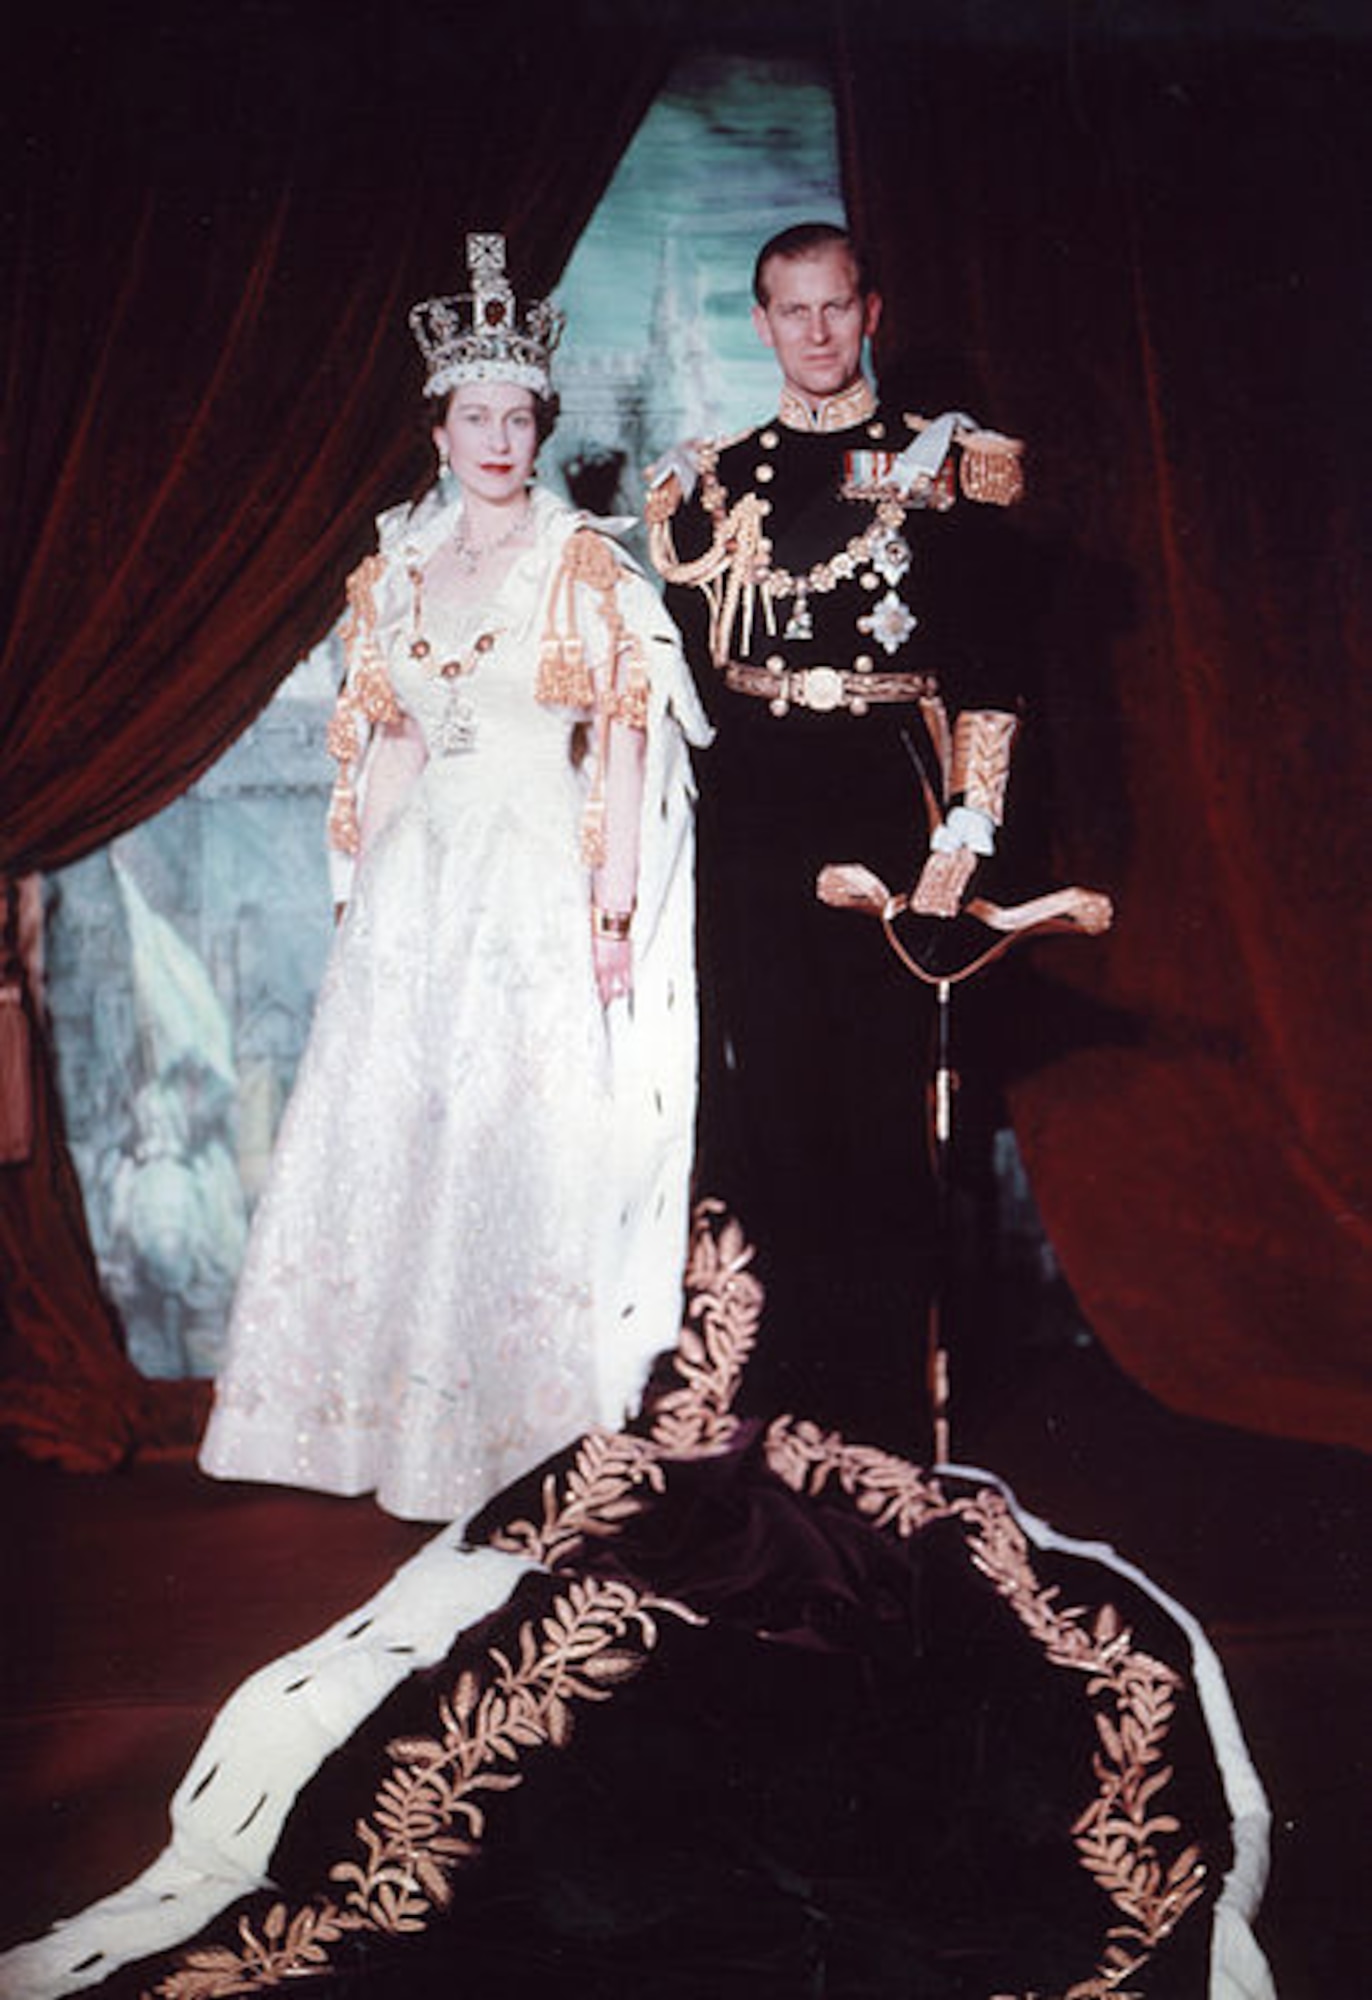 Official portrait of Queen Elizabeth II and Prince Philip, Duke of Edinburgh, following the Queen's coronation in June 1953. (Courtesy photo)